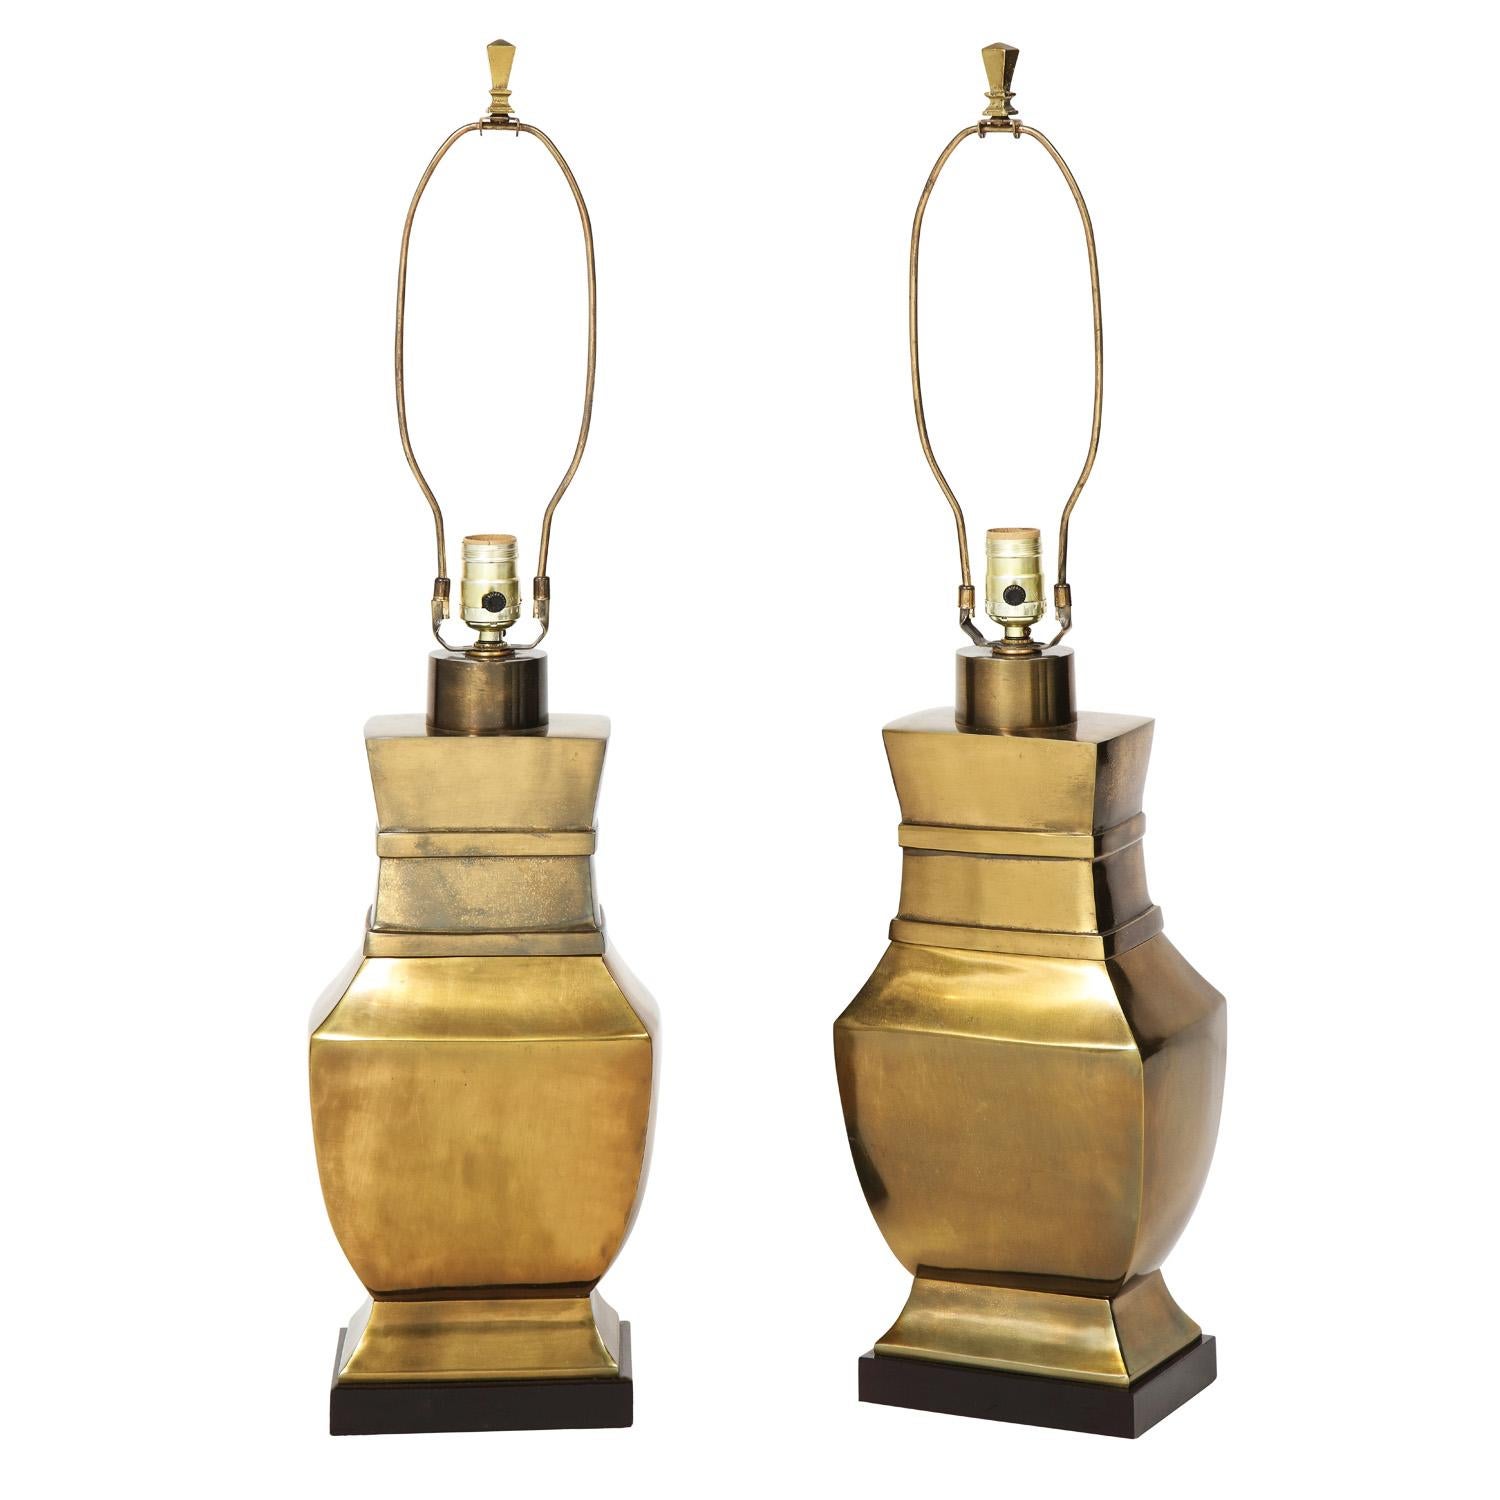 American Paul Hanson Neoclassical Table Lamps in Bronze, 1950s For Sale